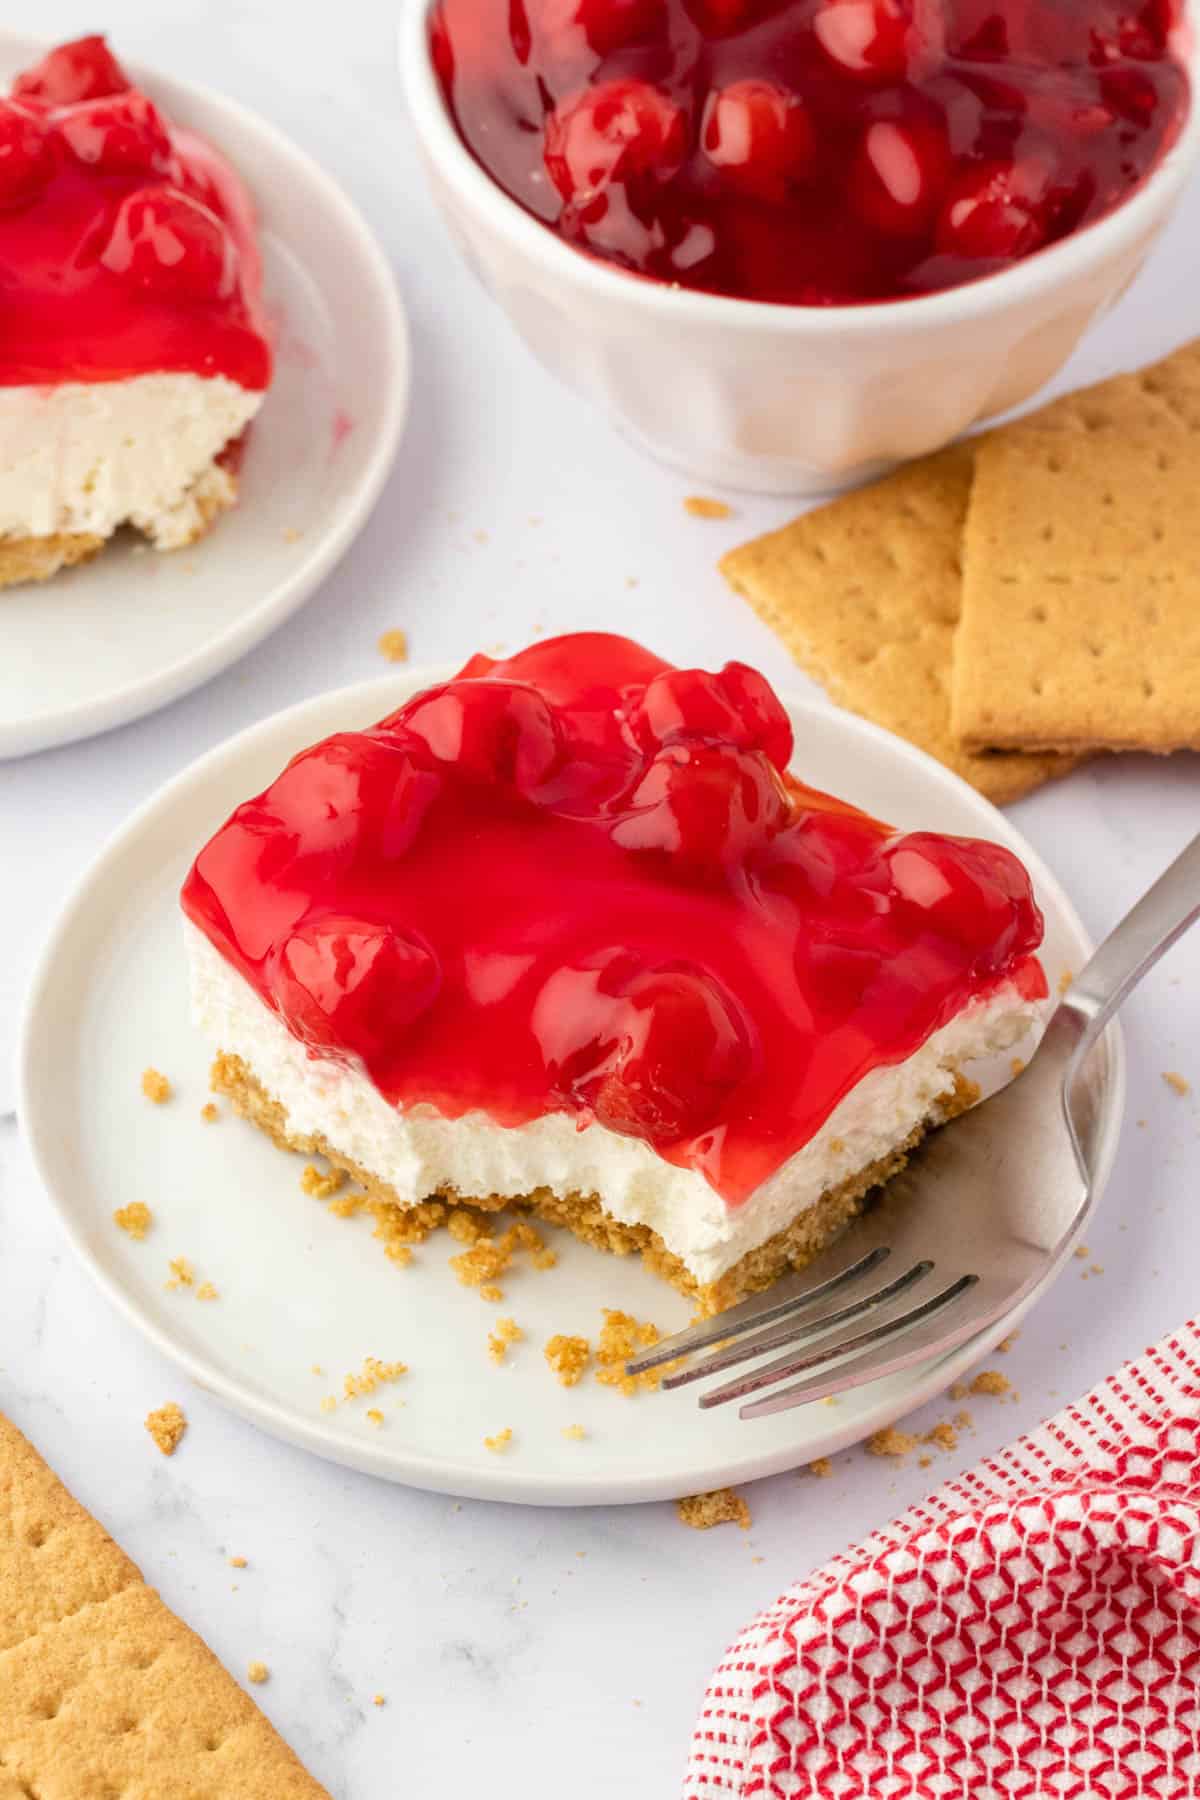 twice slices of cherry delight on white plates surrounded by graham crackers, a red and white towel, and a white bowl filled with cherry pie filling